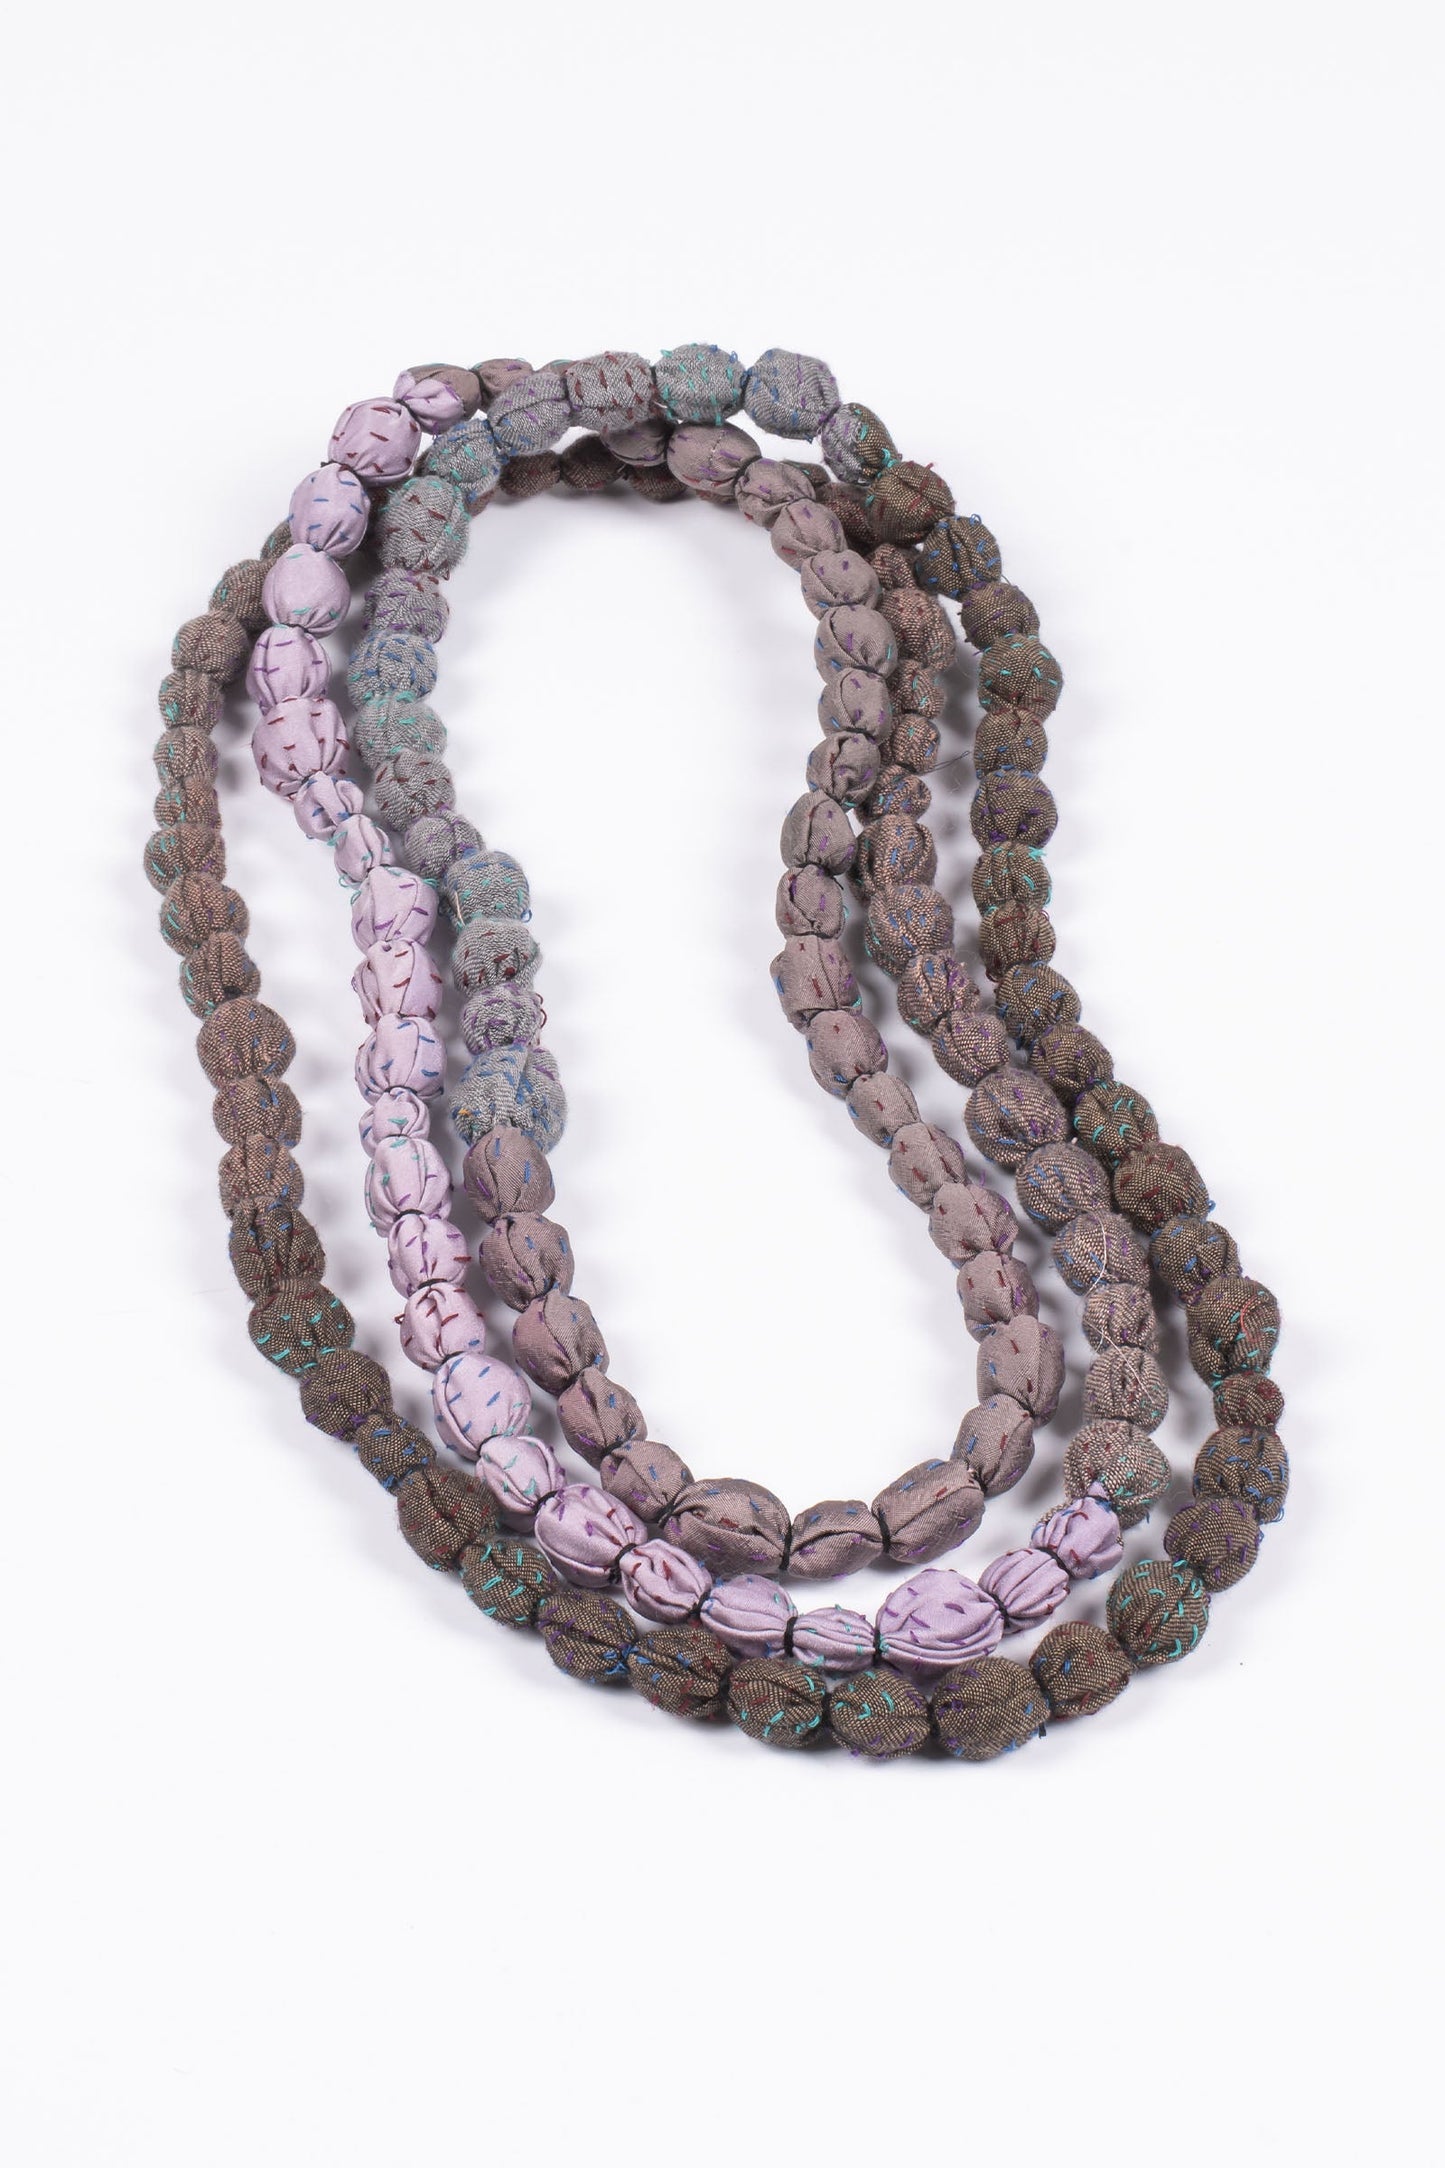 VINTAGE SILK KANTHA TIE BEADS LONG NECKLACE